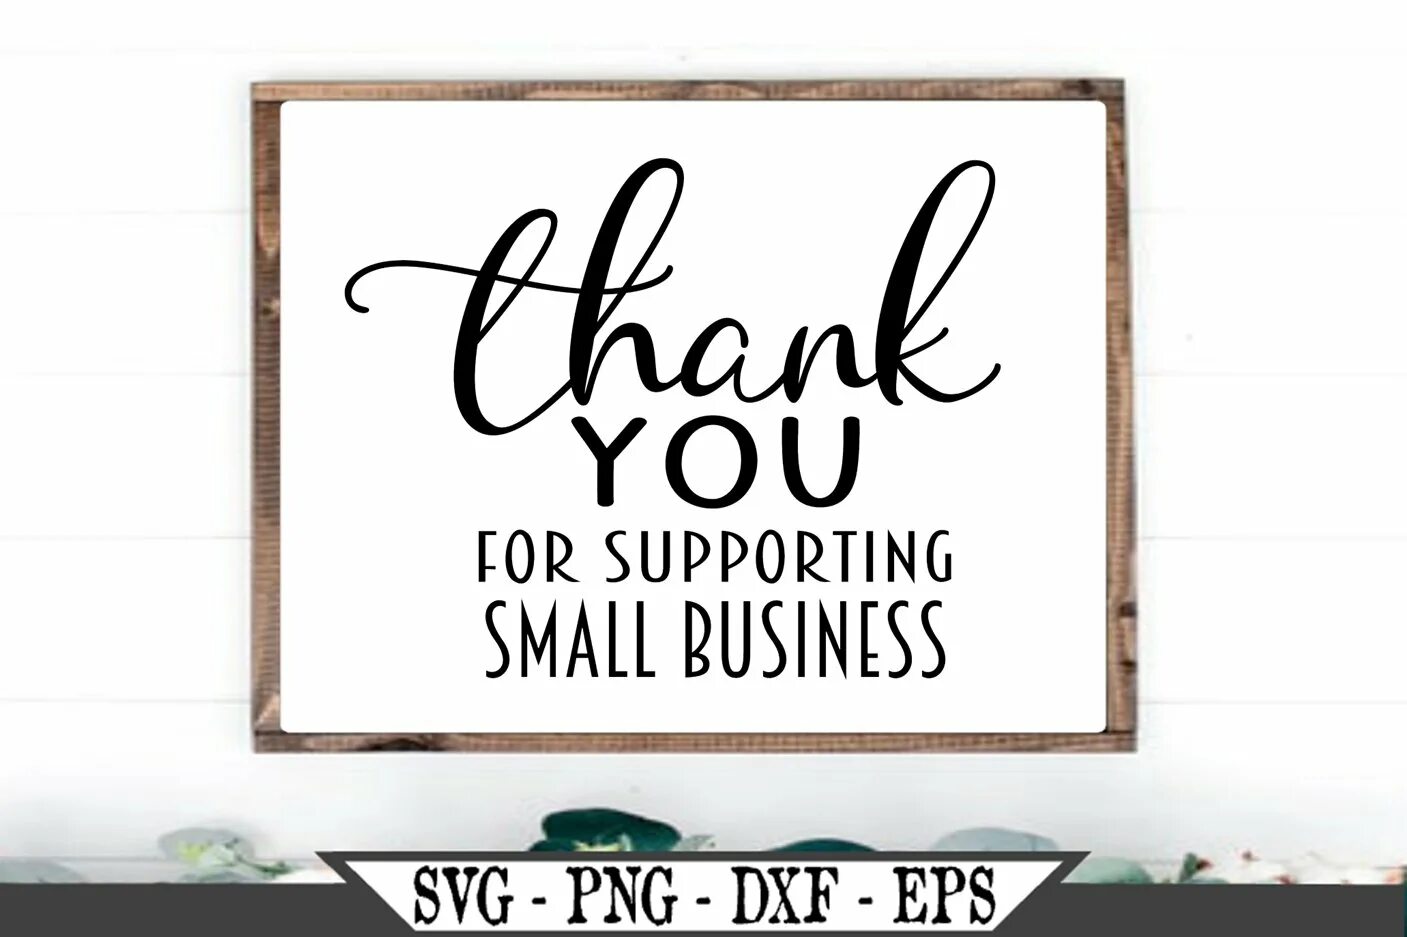 Thank you for supporting my small Business. Thank you Business. Thank you Card for small Business. Thank you for supporting small Business.